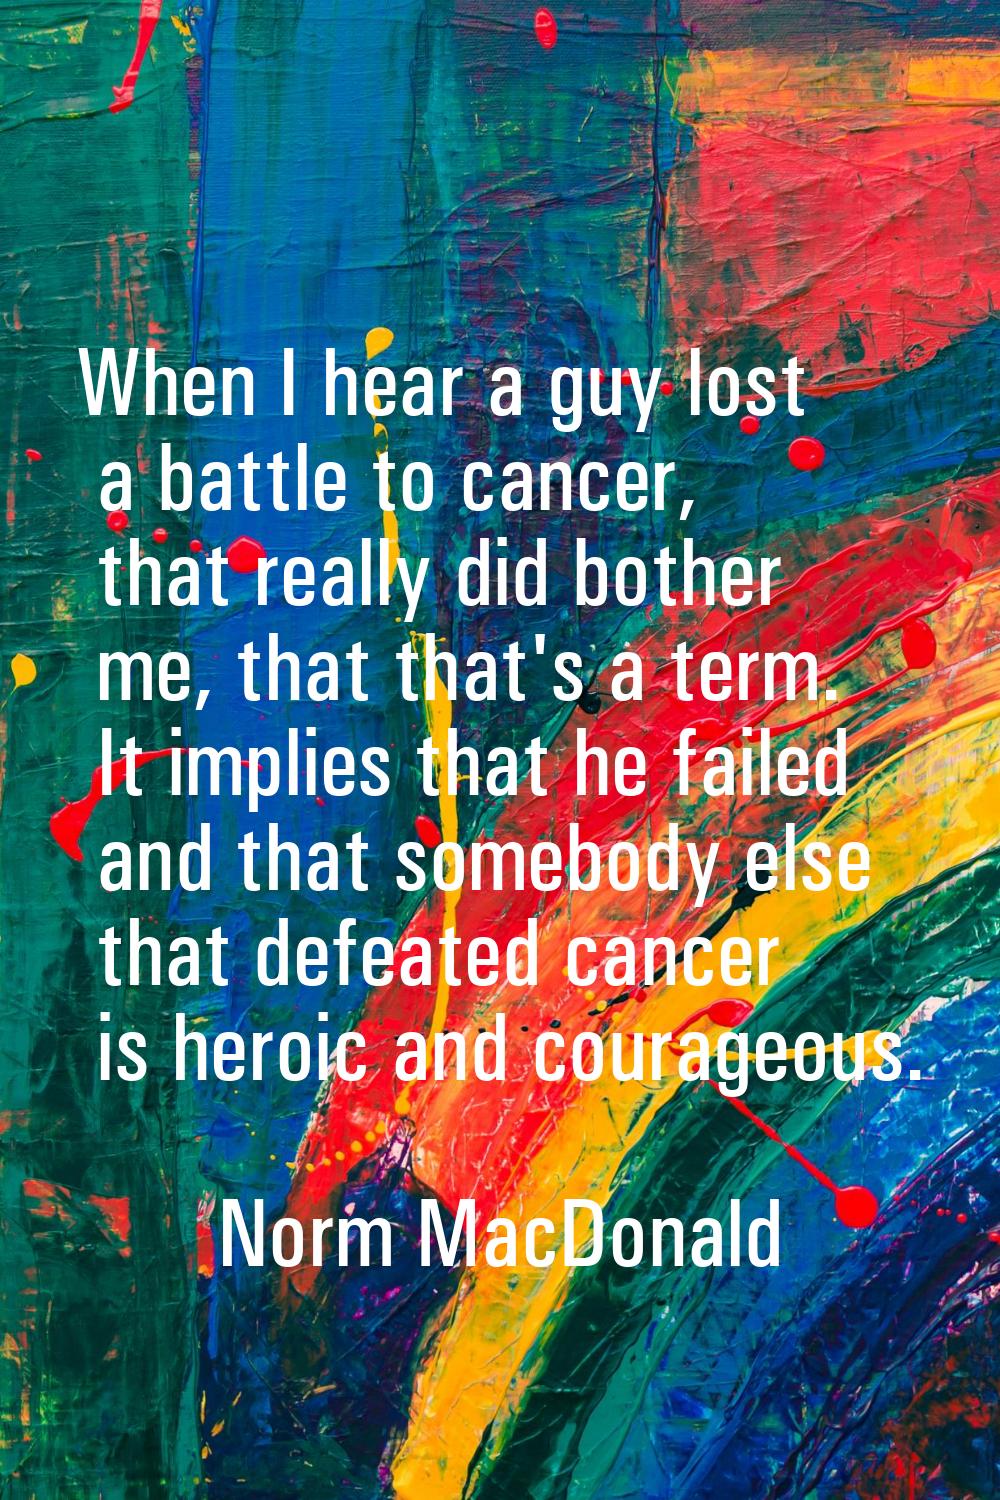 When I hear a guy lost a battle to cancer, that really did bother me, that that's a term. It implie